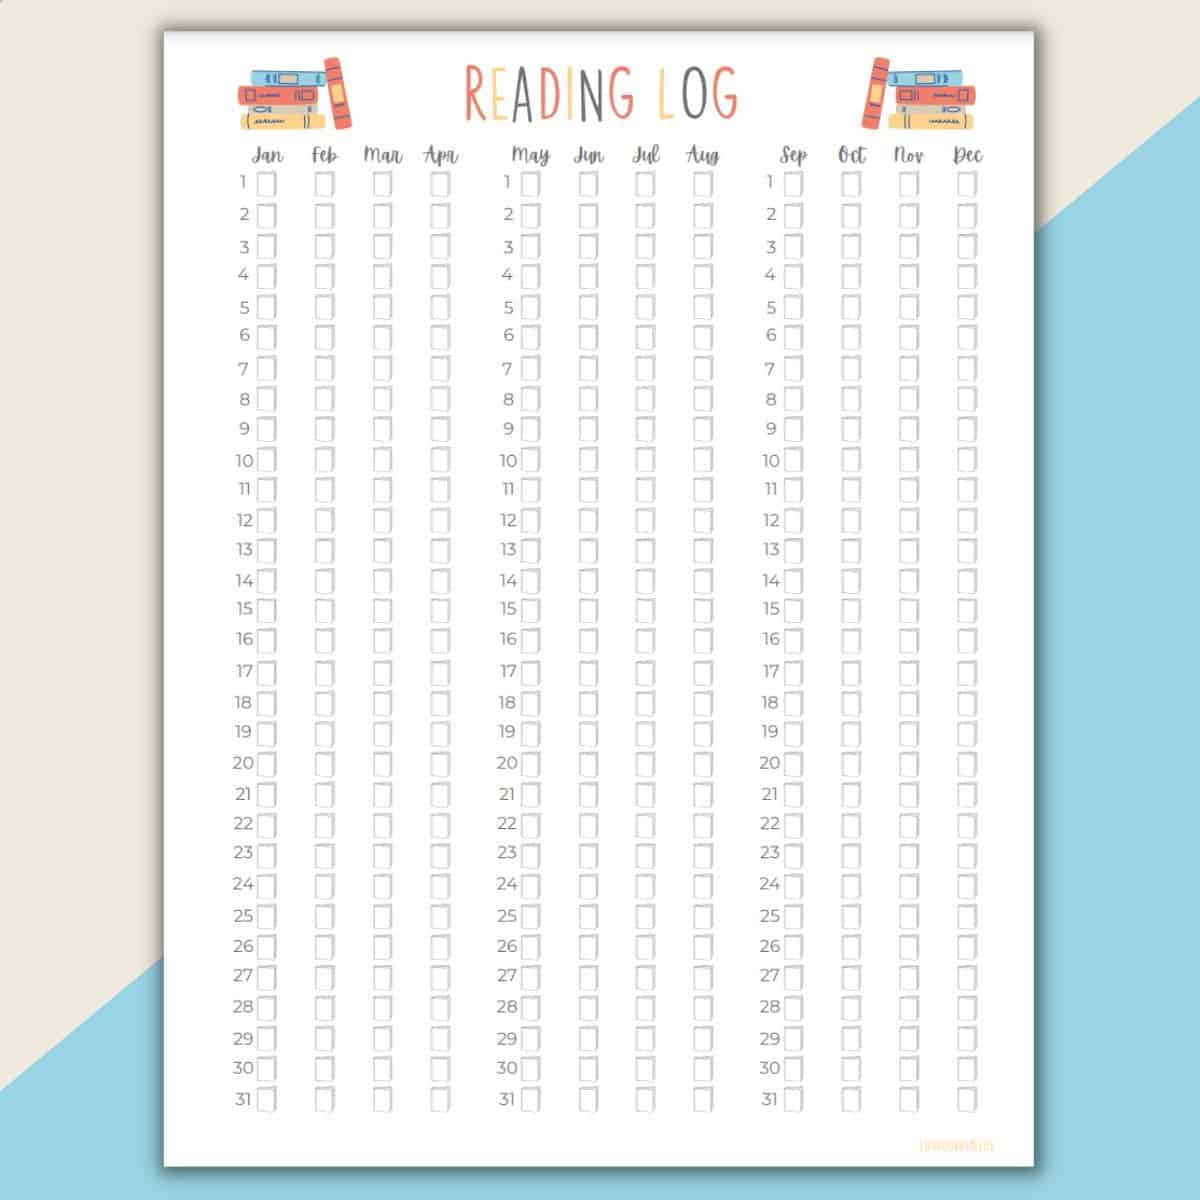 Reading log yearly book tracker printable on blue and tan background.